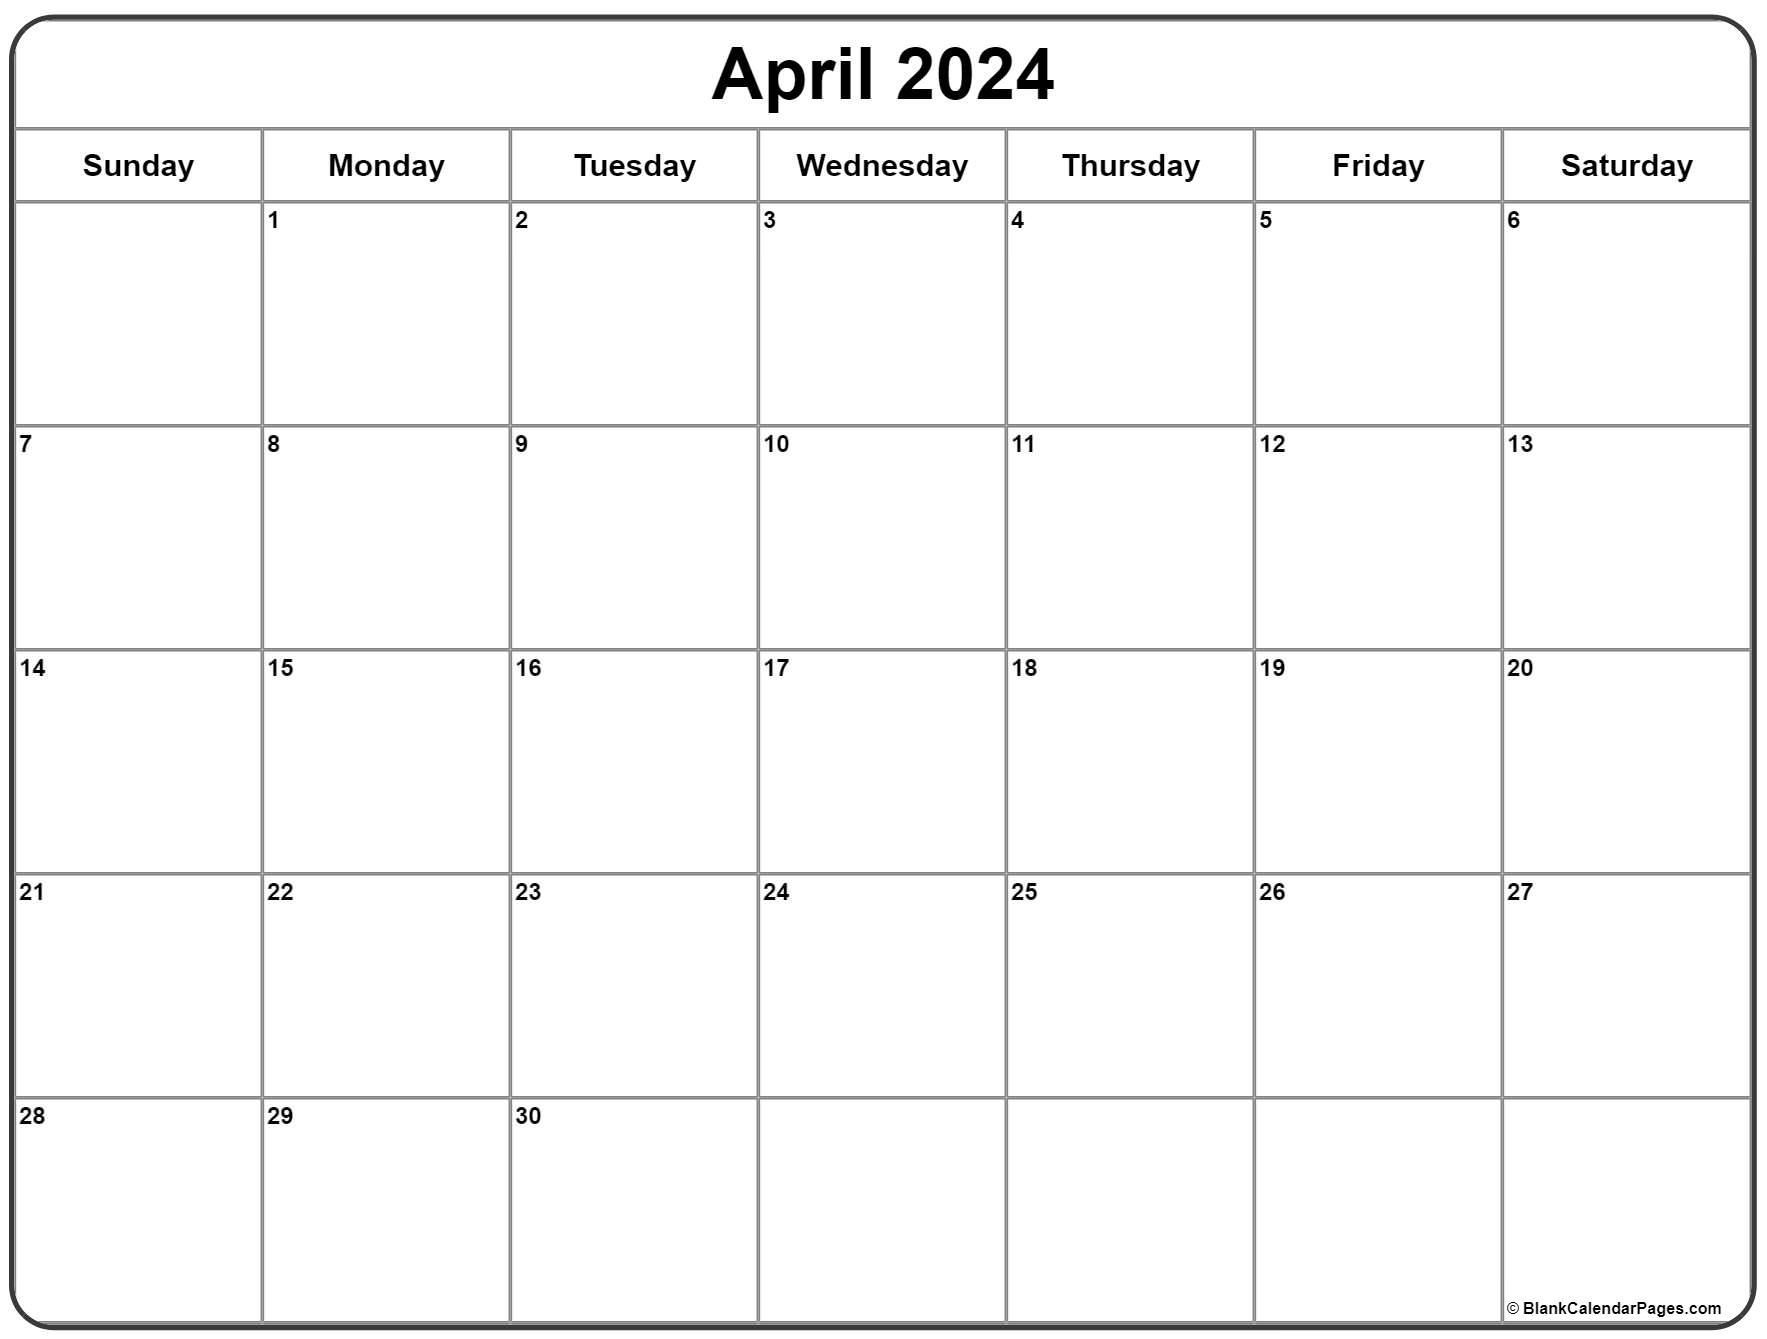 Blank Calendar 2023 Printable Monthly April IMAGESEE